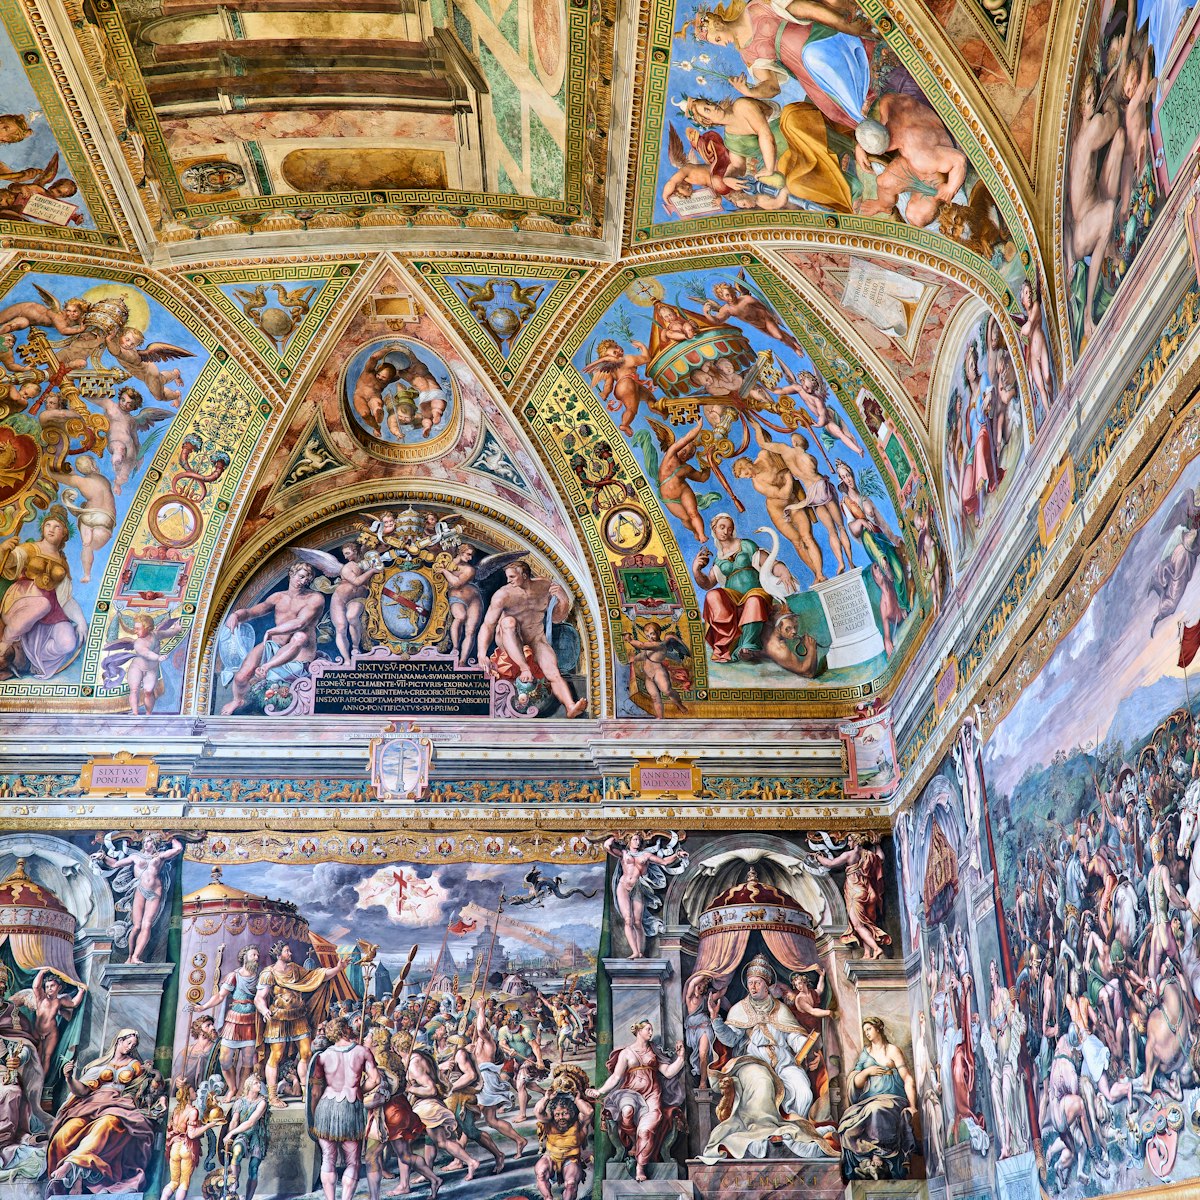 Rome Lazio Italy. The Vatican Museums in Vatican City. Raphael rooms frescoes